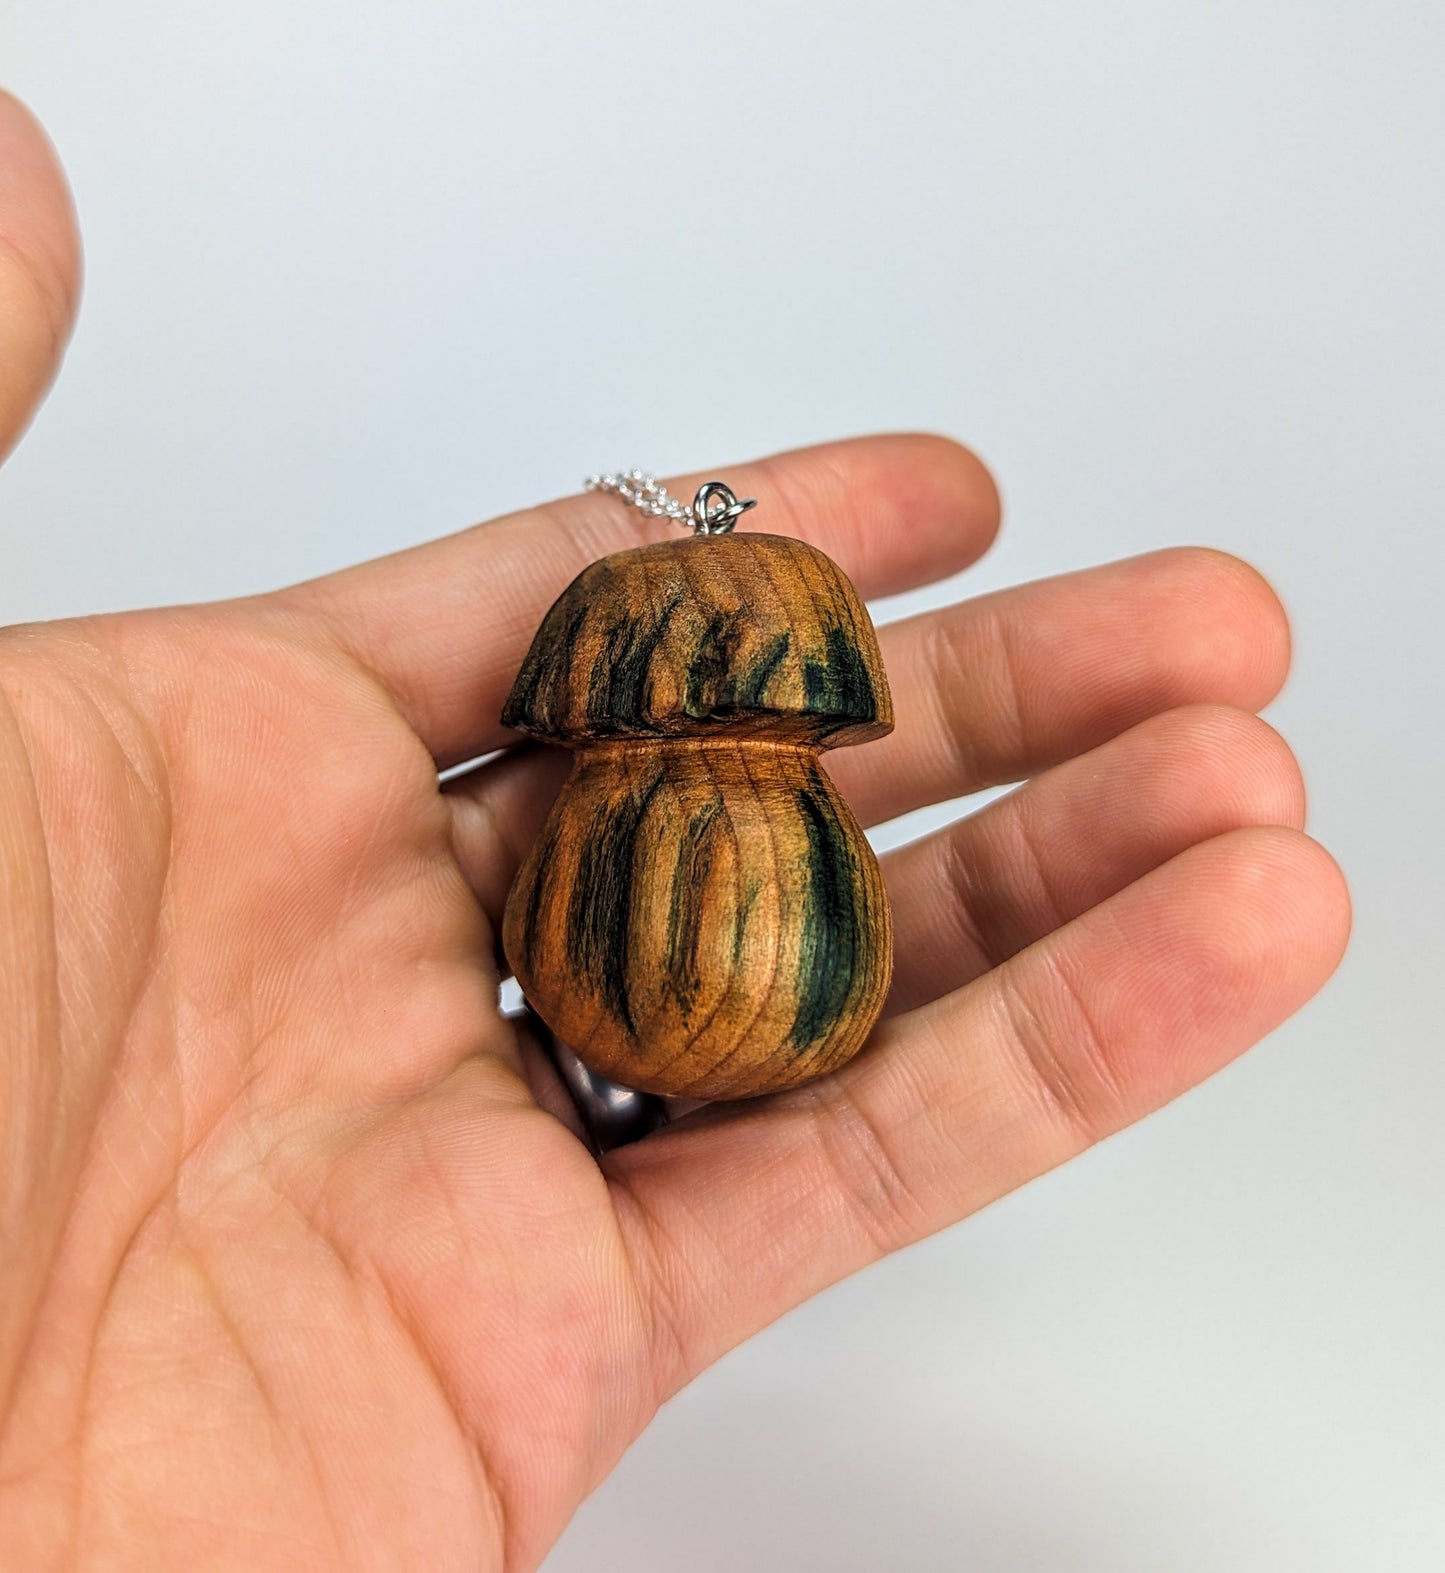 Naturally Fungus-Stained Wooden Pendant | Large Porcini